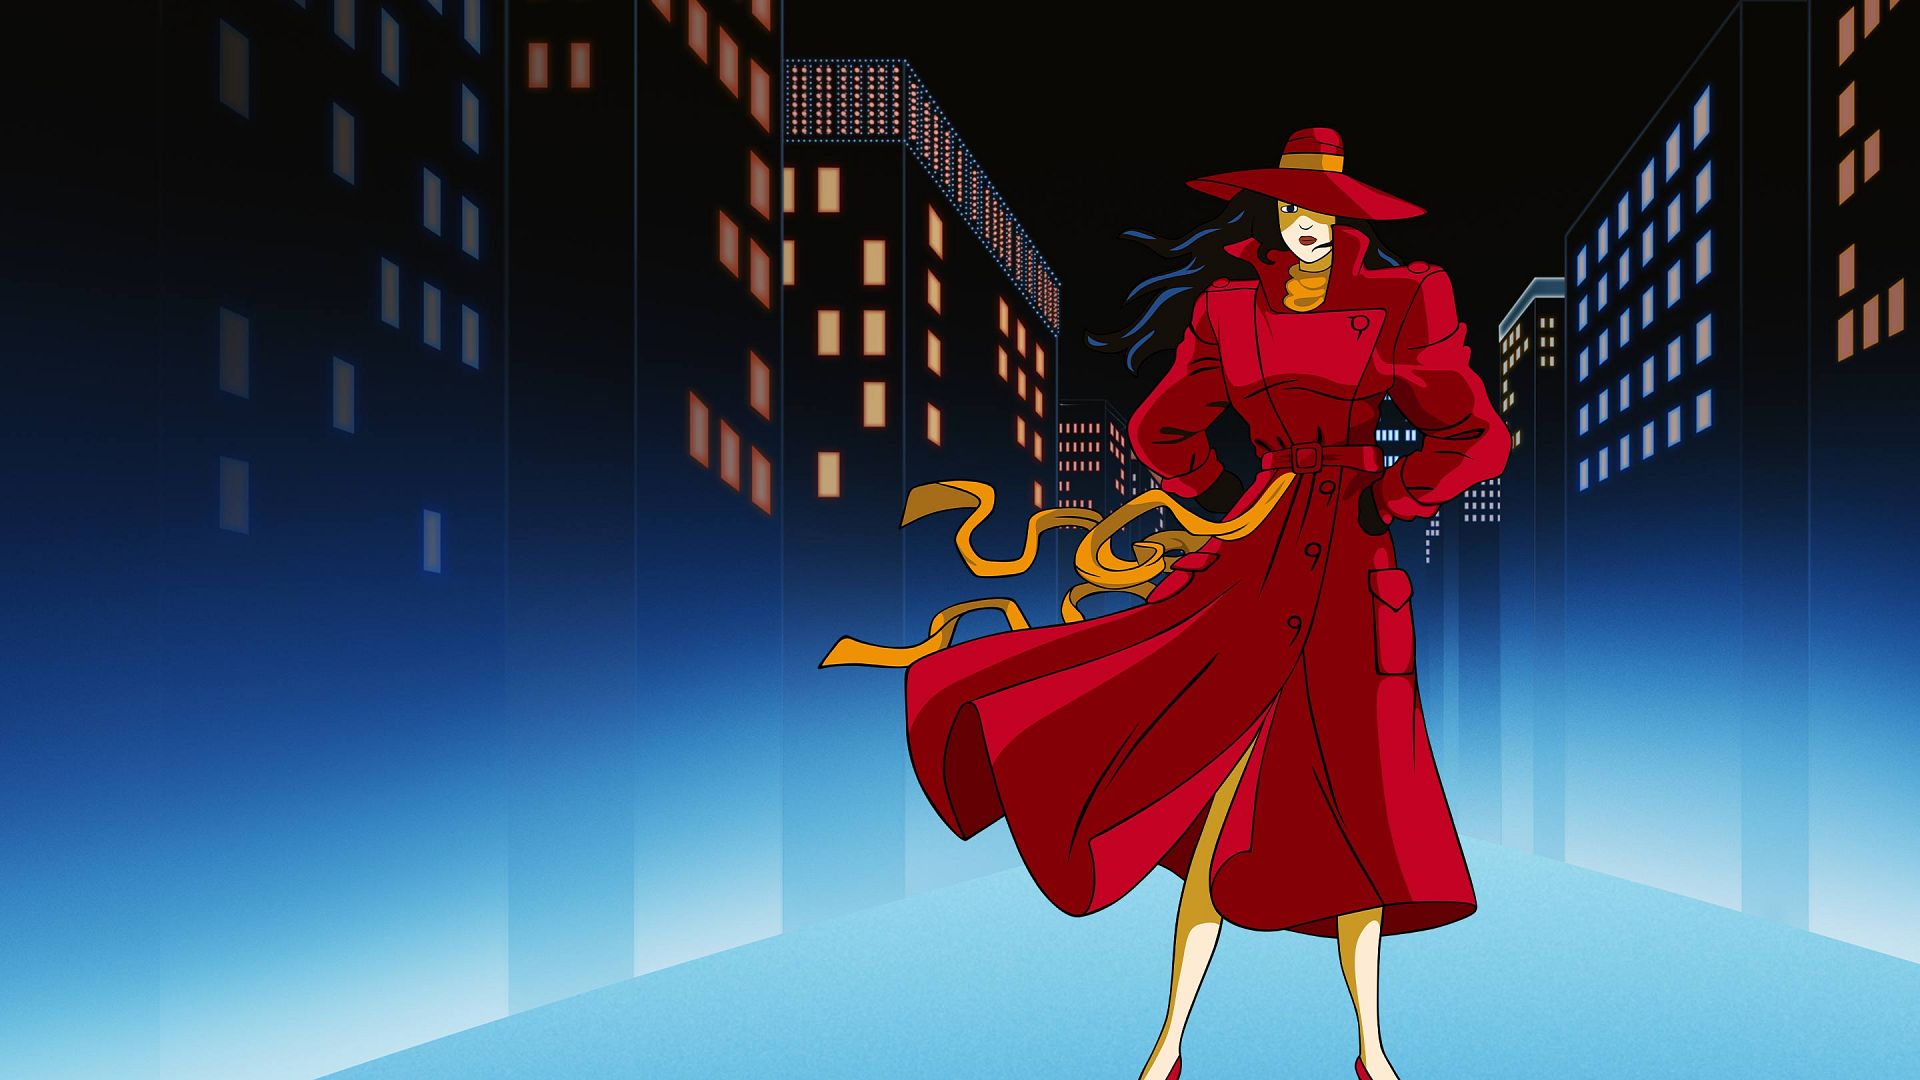 play where in the world is carmen sandiego game free